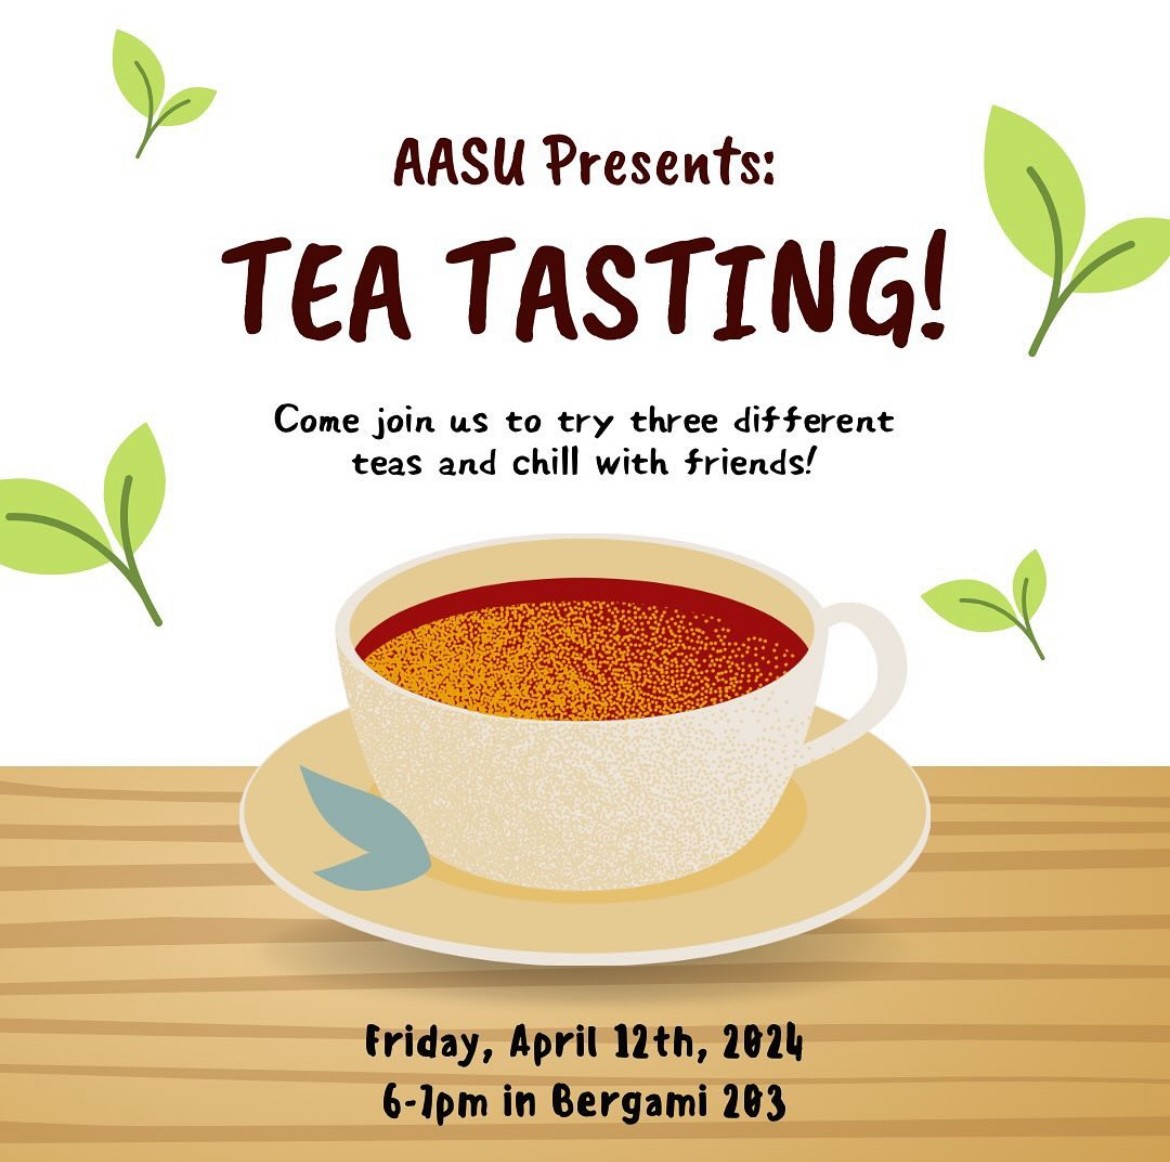 AASU’s flyer for one of their recent events.